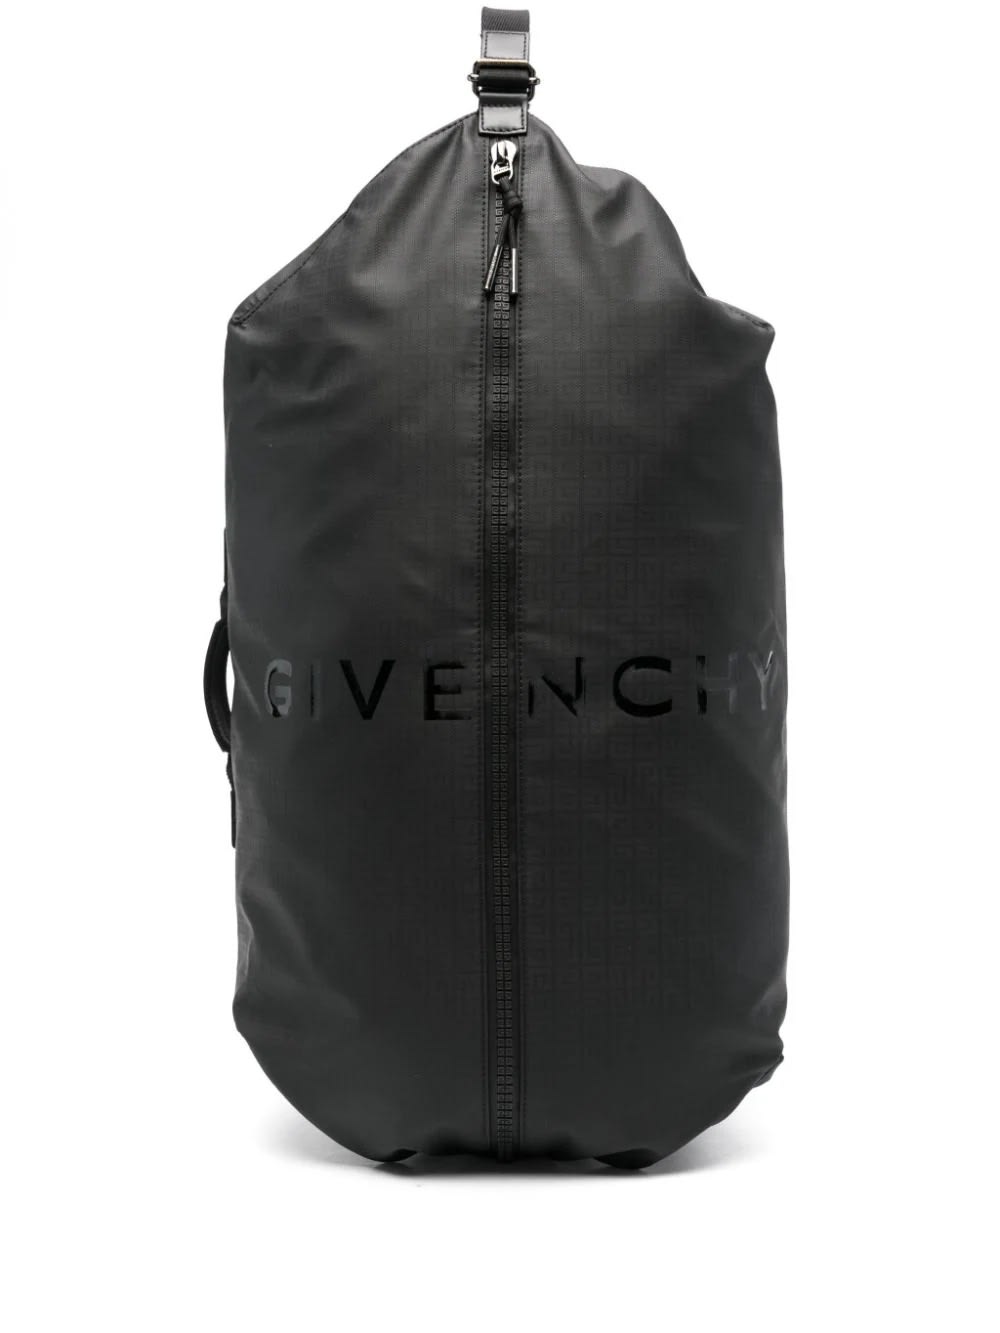 Givenchy G-zip Backpack In Black 4g Nylon